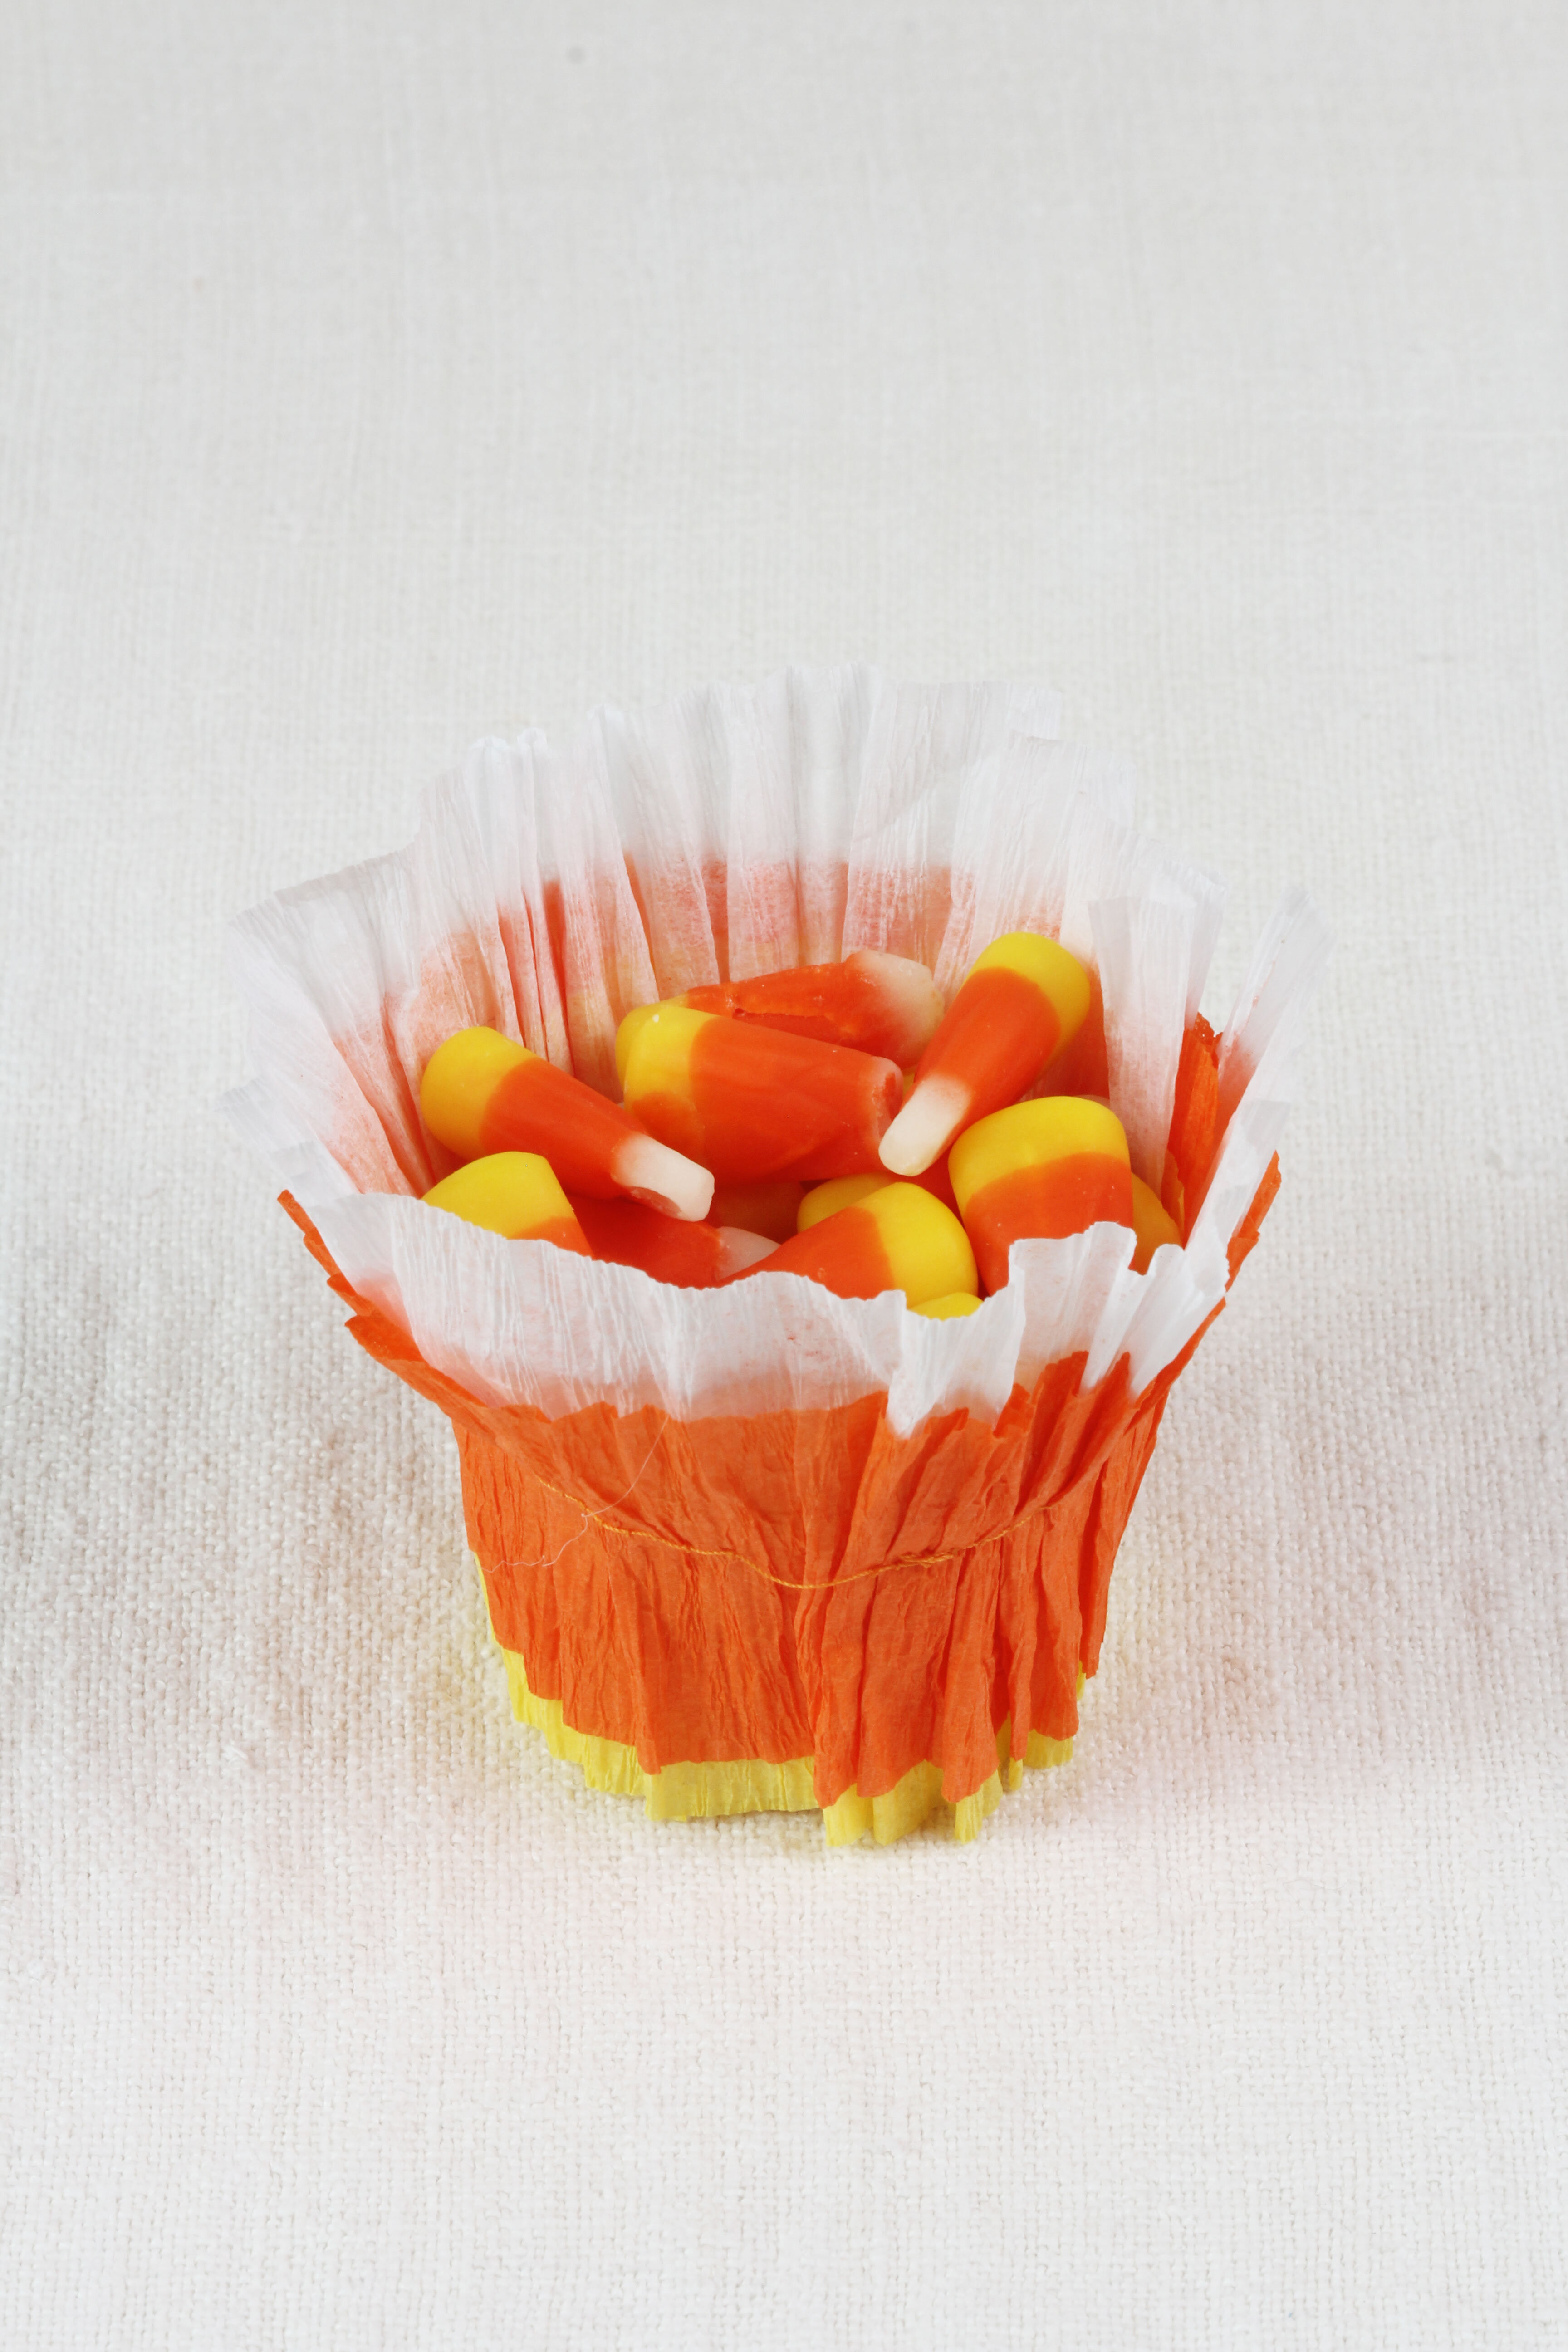 Make these festive DIY Individual Candy Corn Baskets for everyone at the table! Perfect size for a handful of candy corns or colored M&M's.